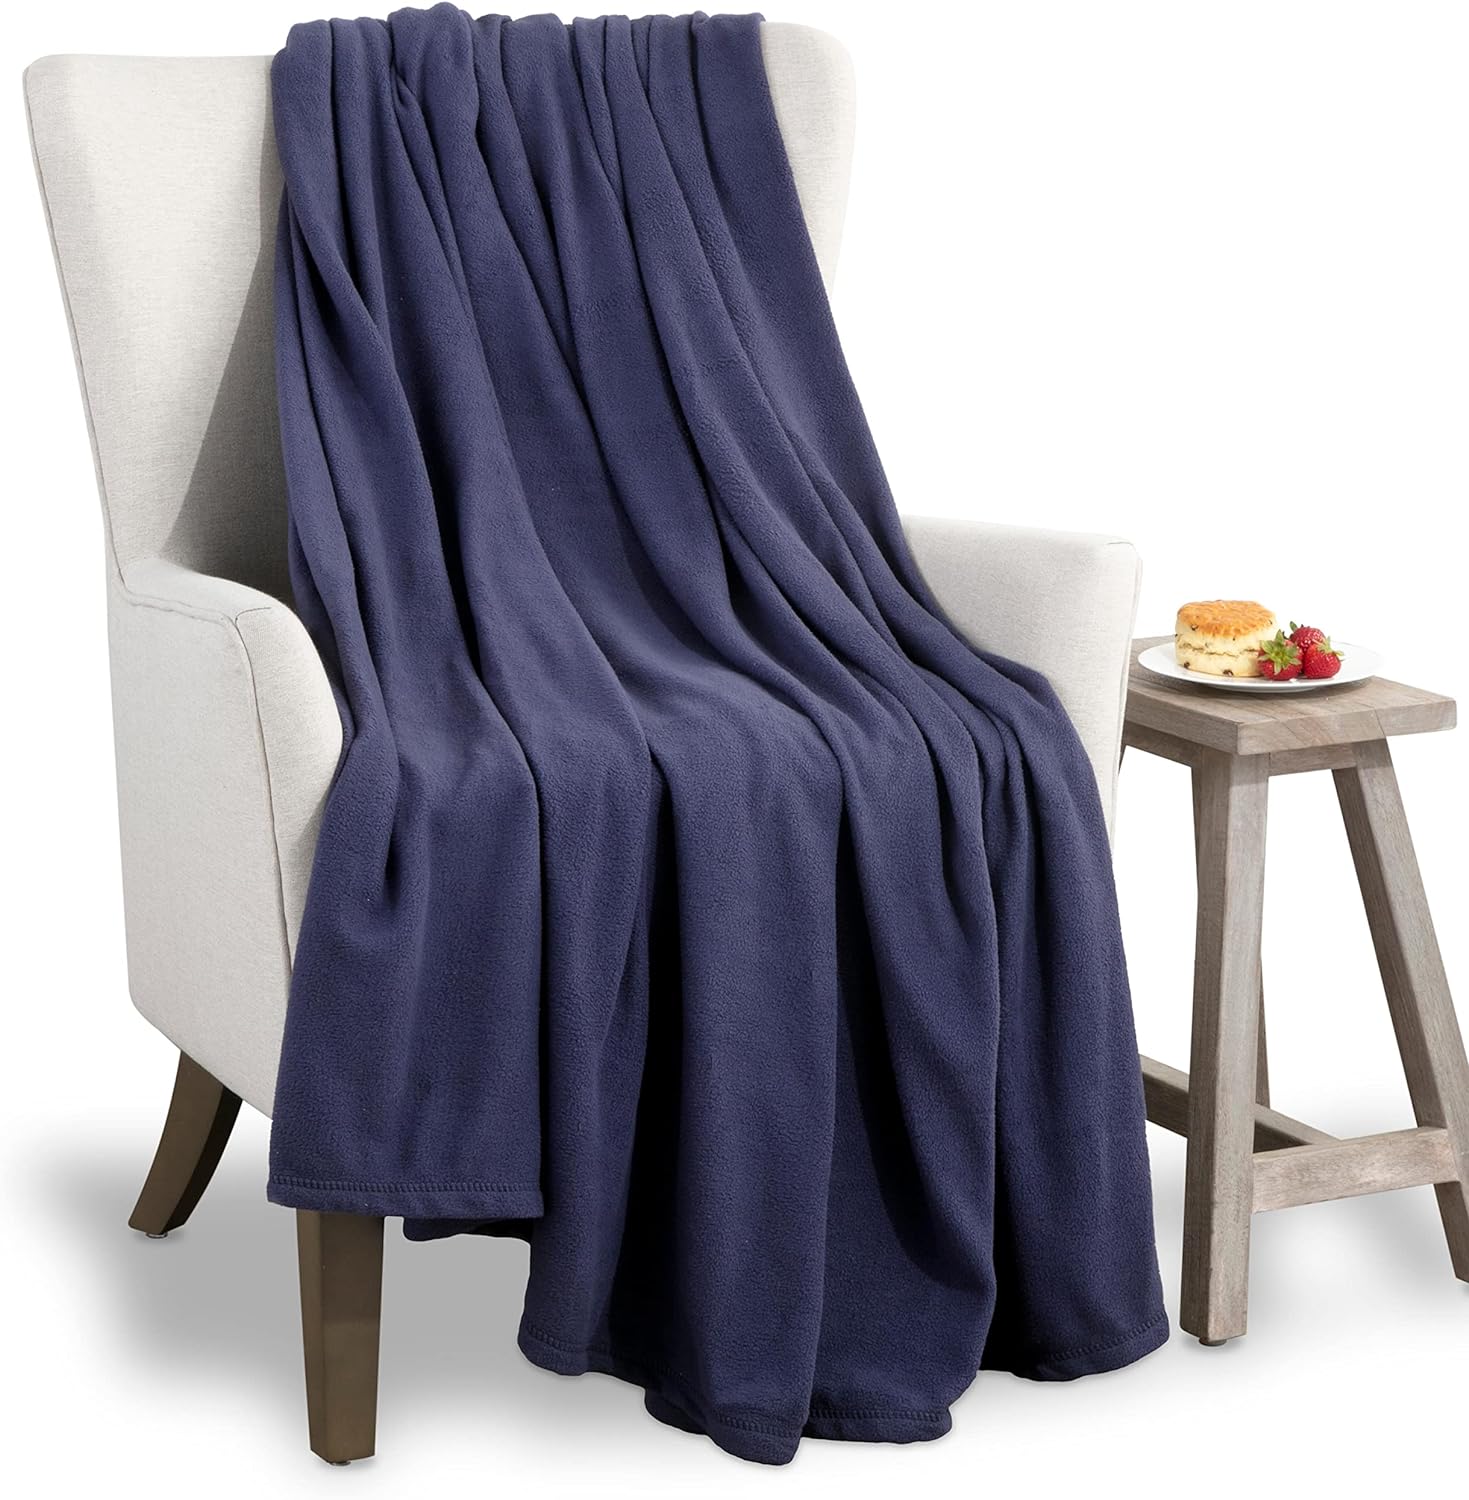 This blanket is so comfortable and warm. It is light weight but it will keep you very warm. It washes up really nice. Best blanket I have ever brought.